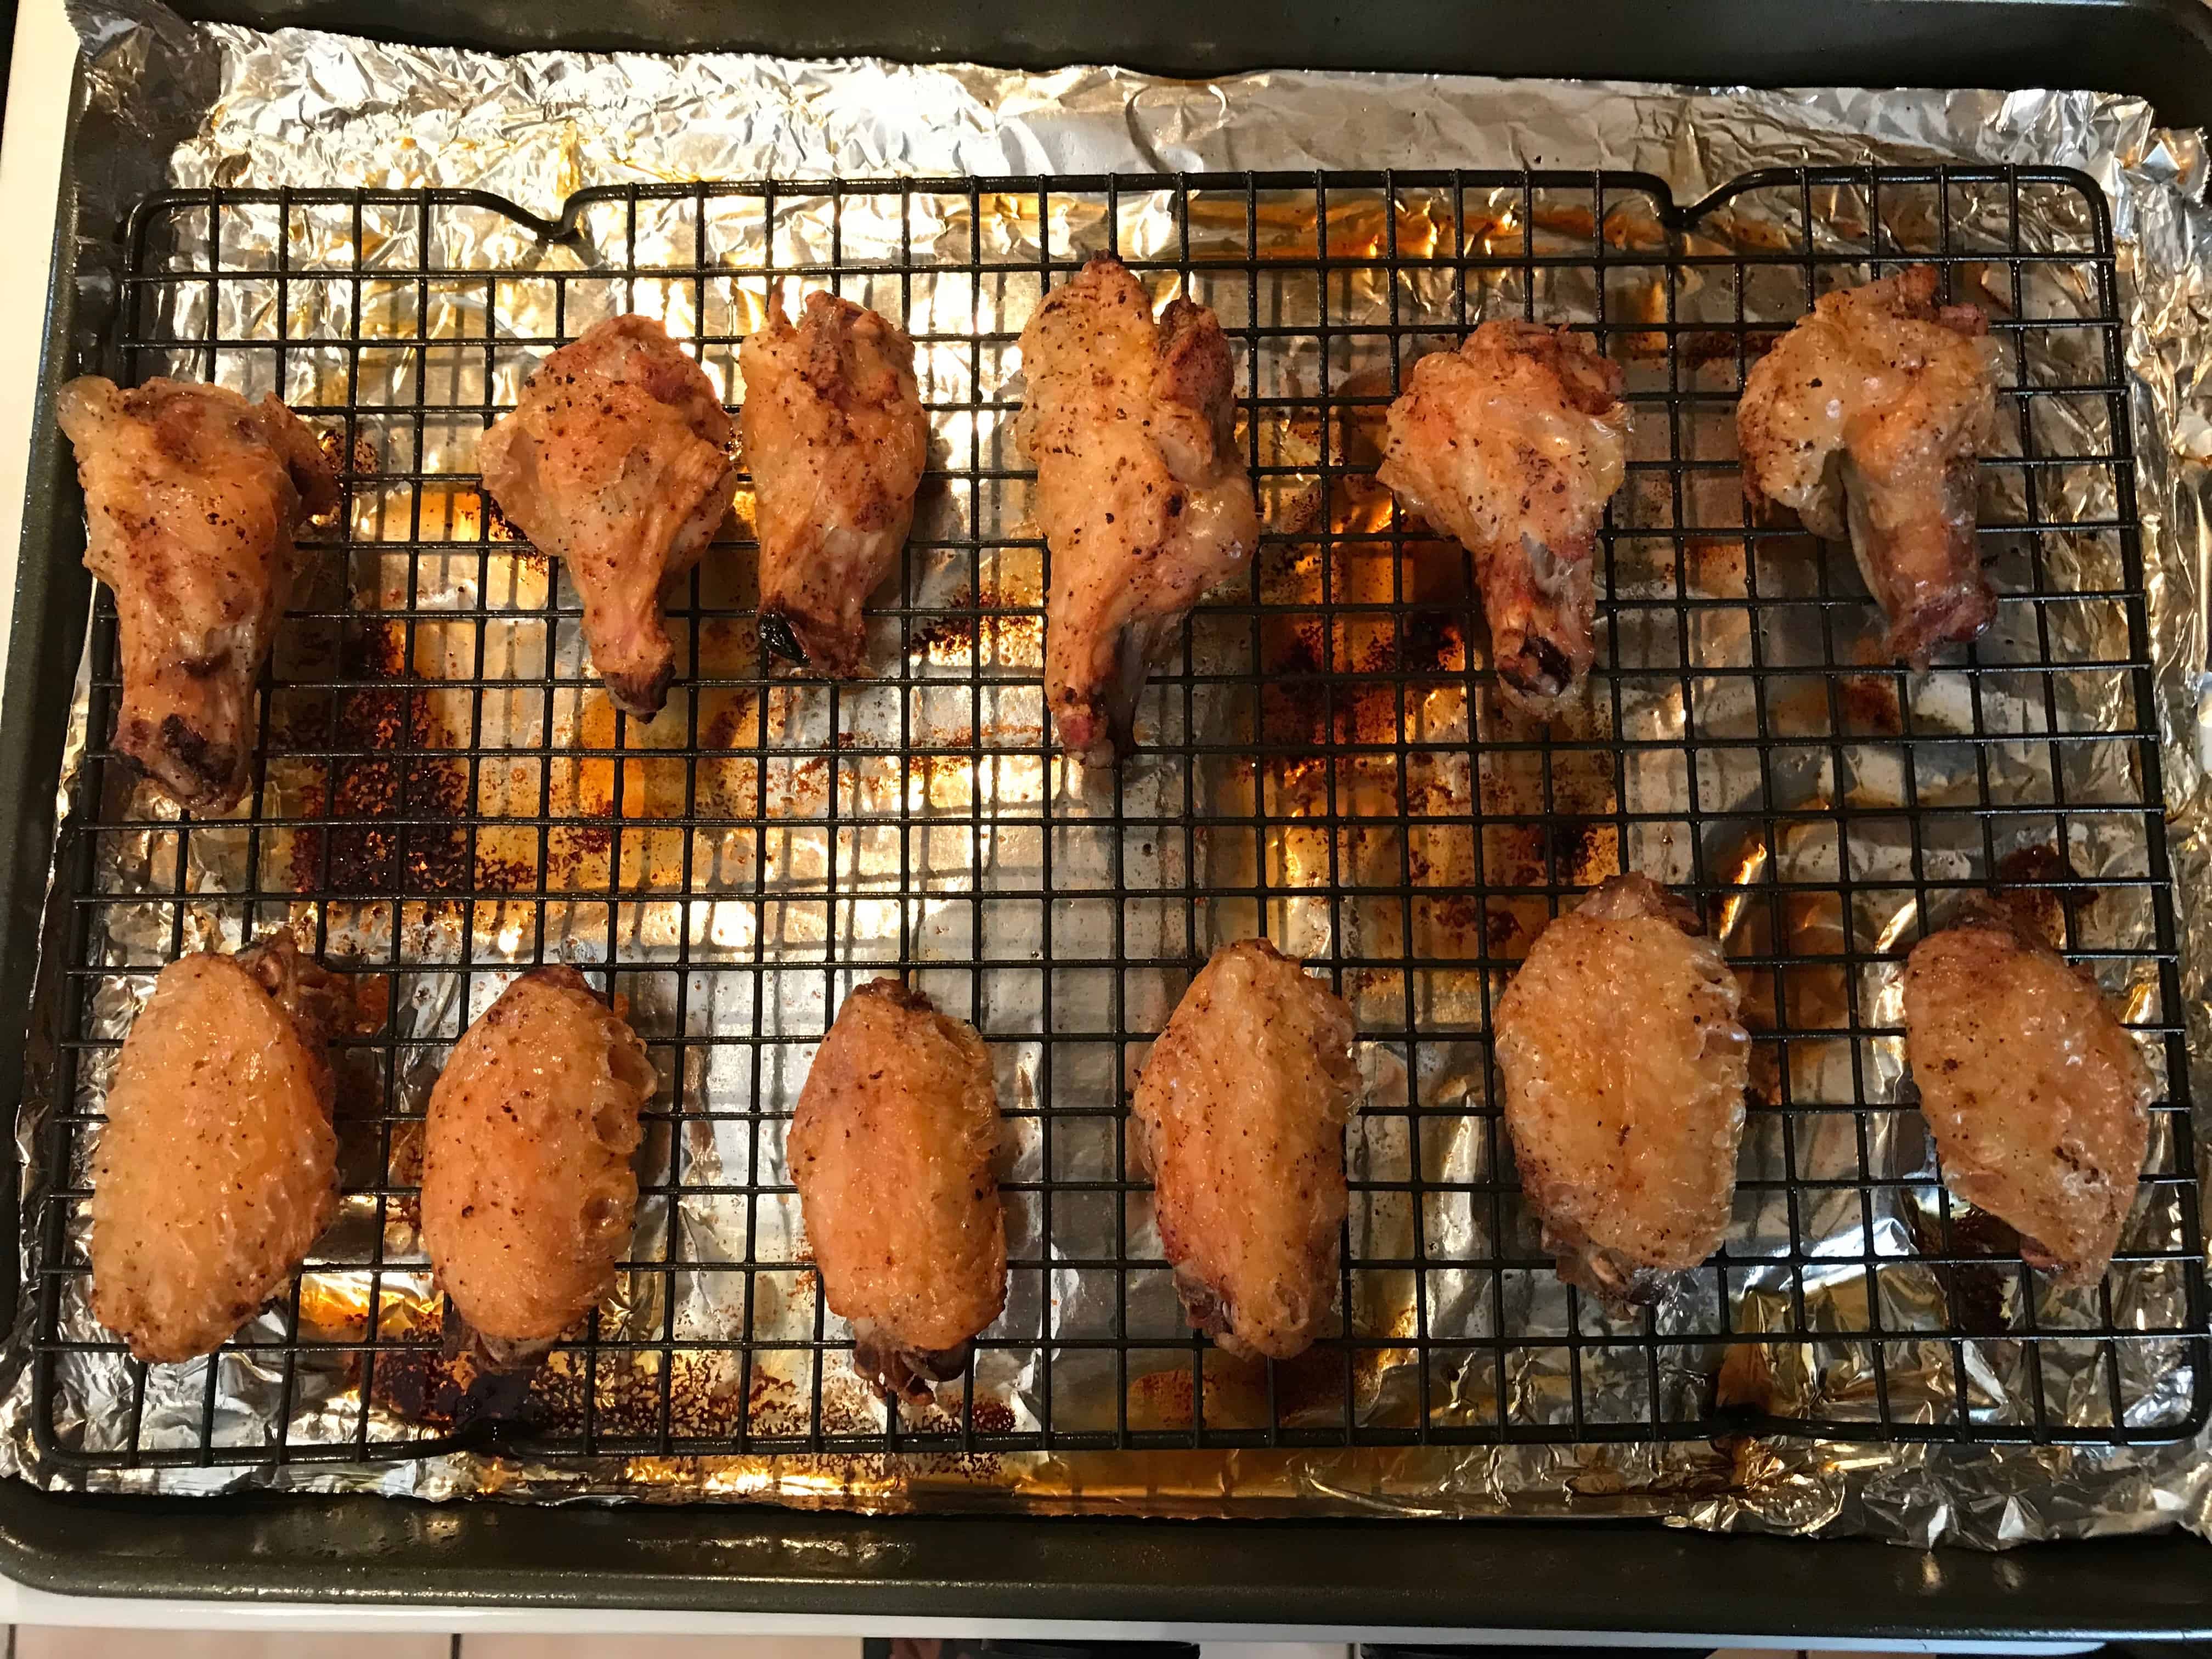 Cooked chicken wings on baking rack